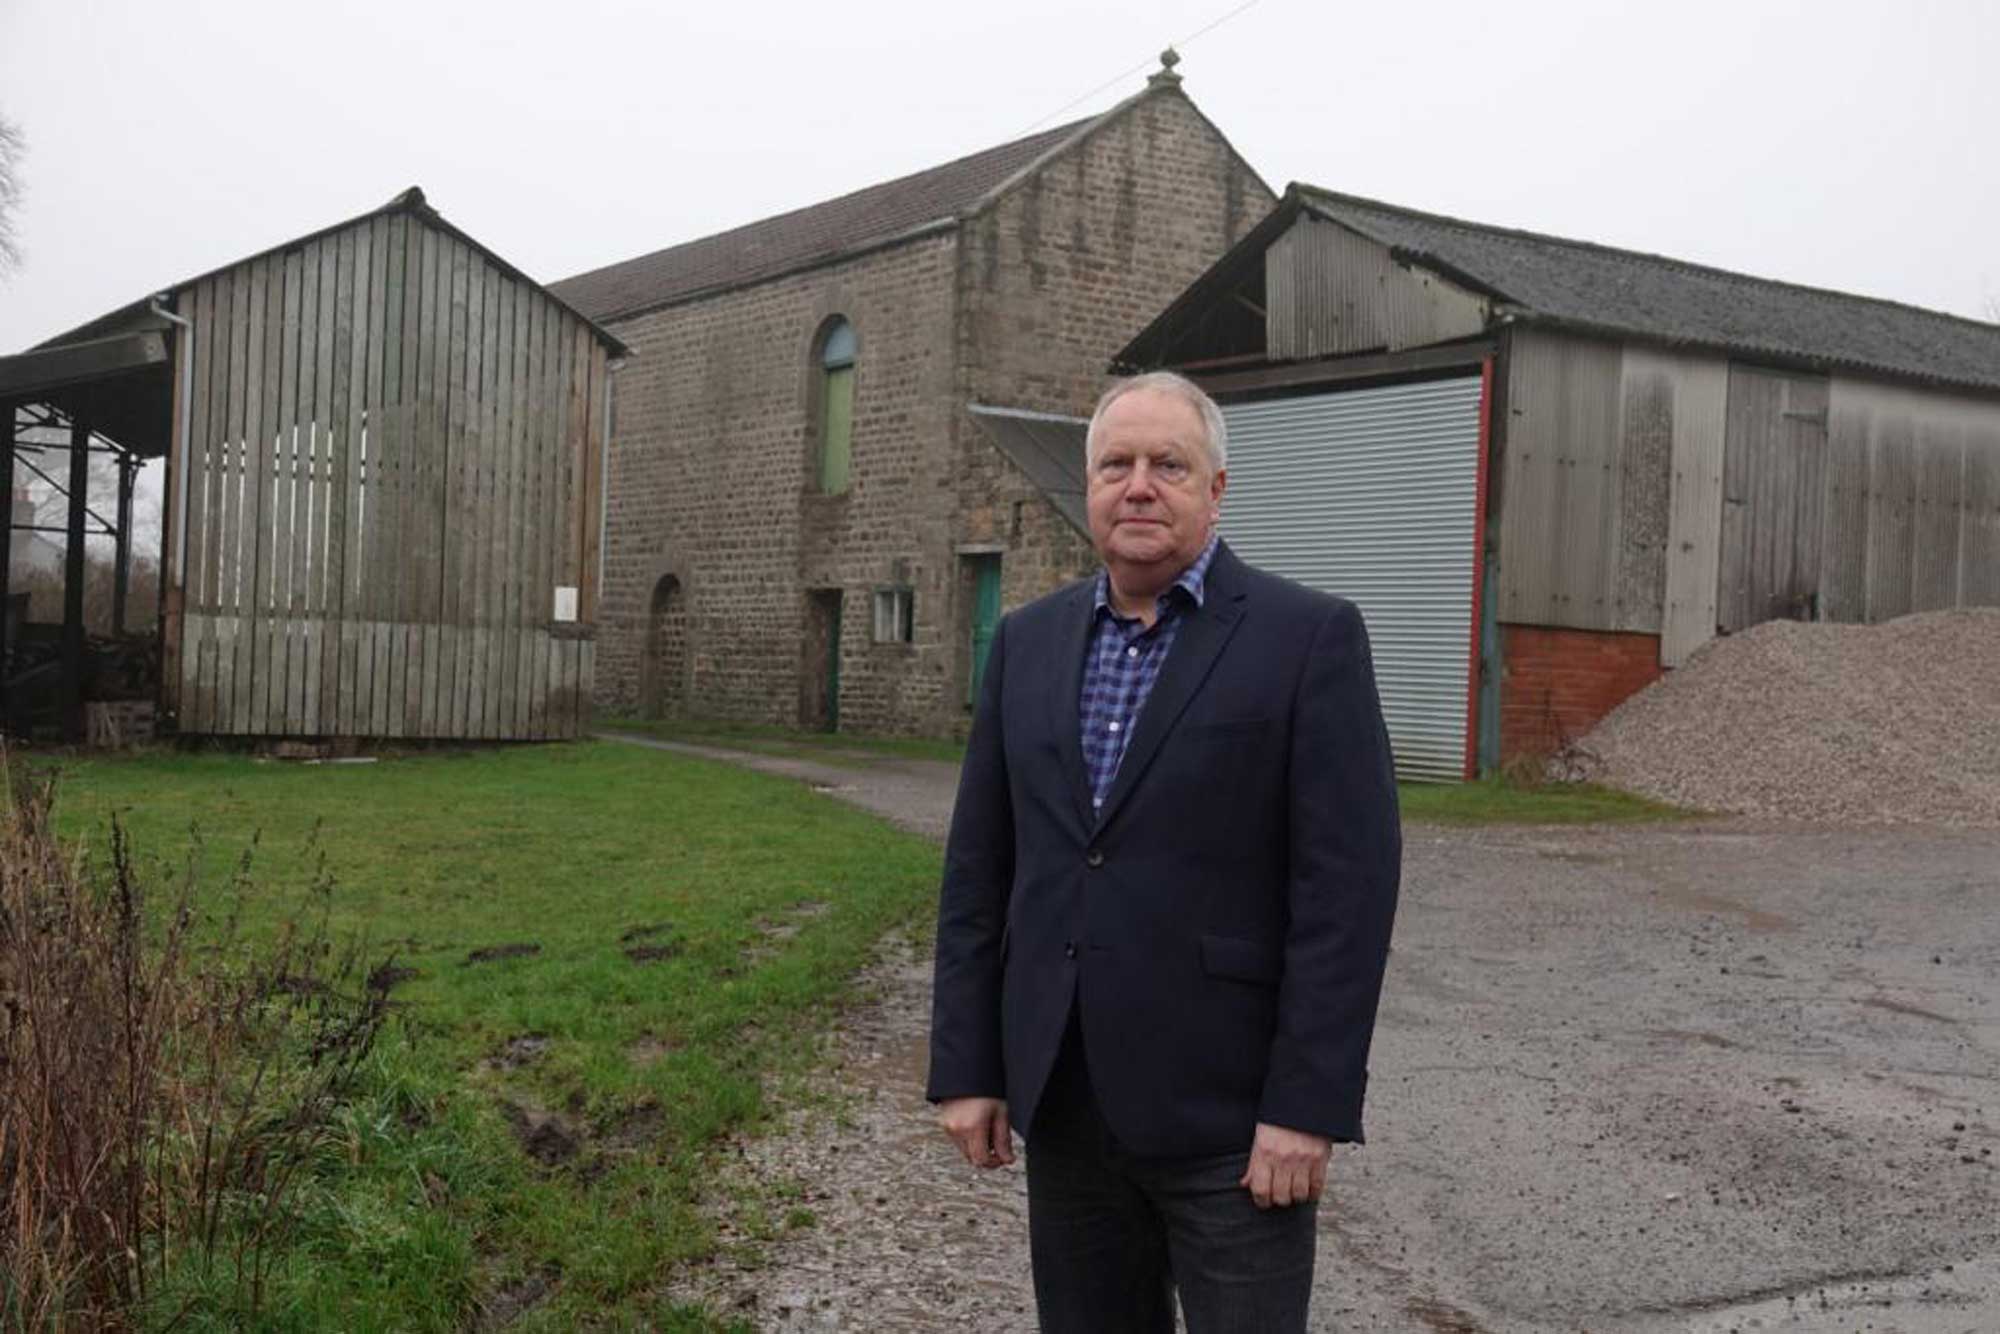 Crimple Valley campaigner Steve Norman in front of the barn at Crimple House Farm